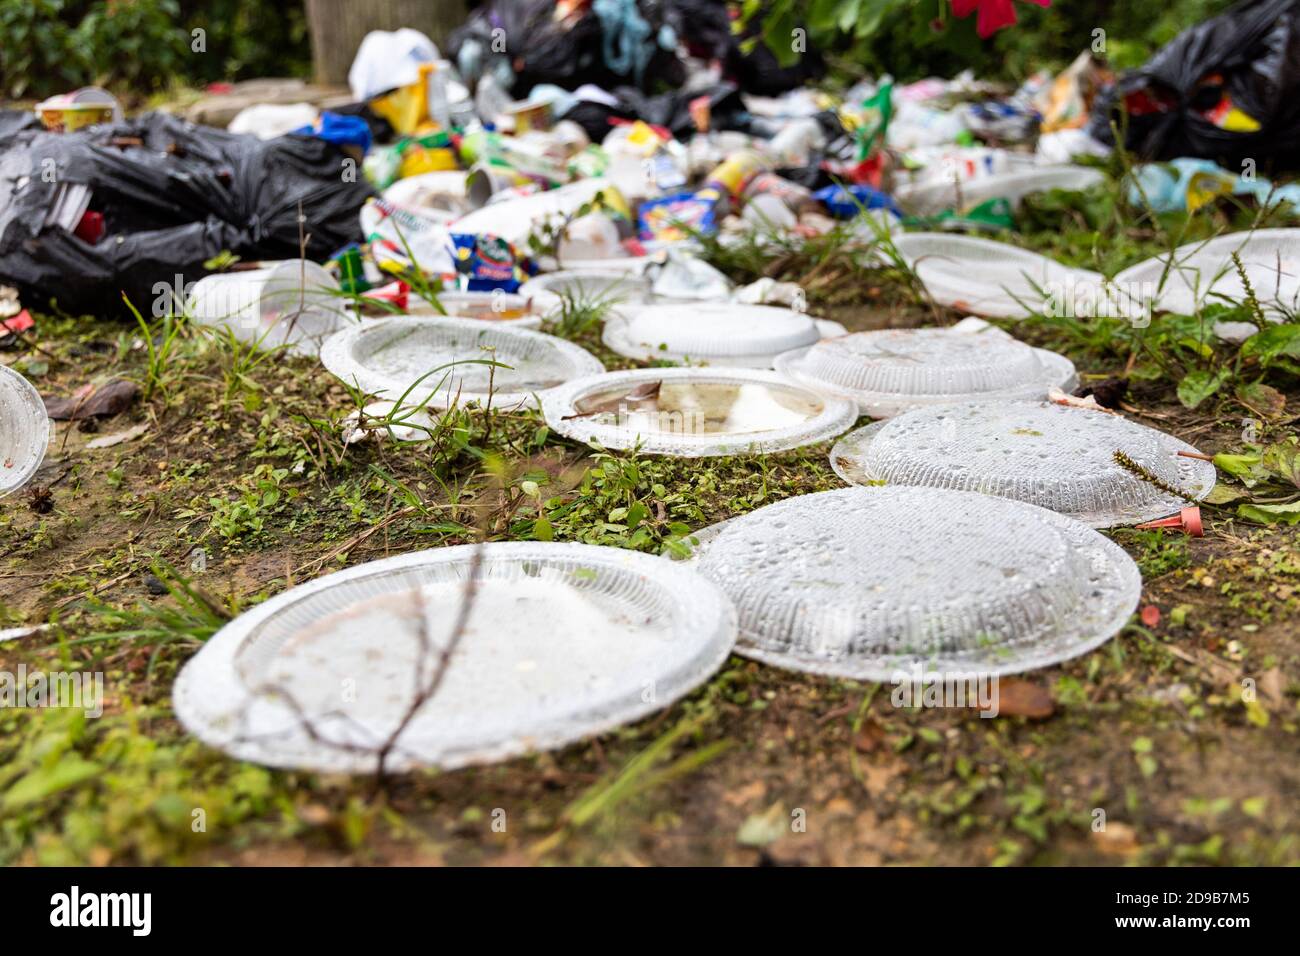 Indiscriminate litter of plastic non-biodegradable at garbage dump Stock Photo